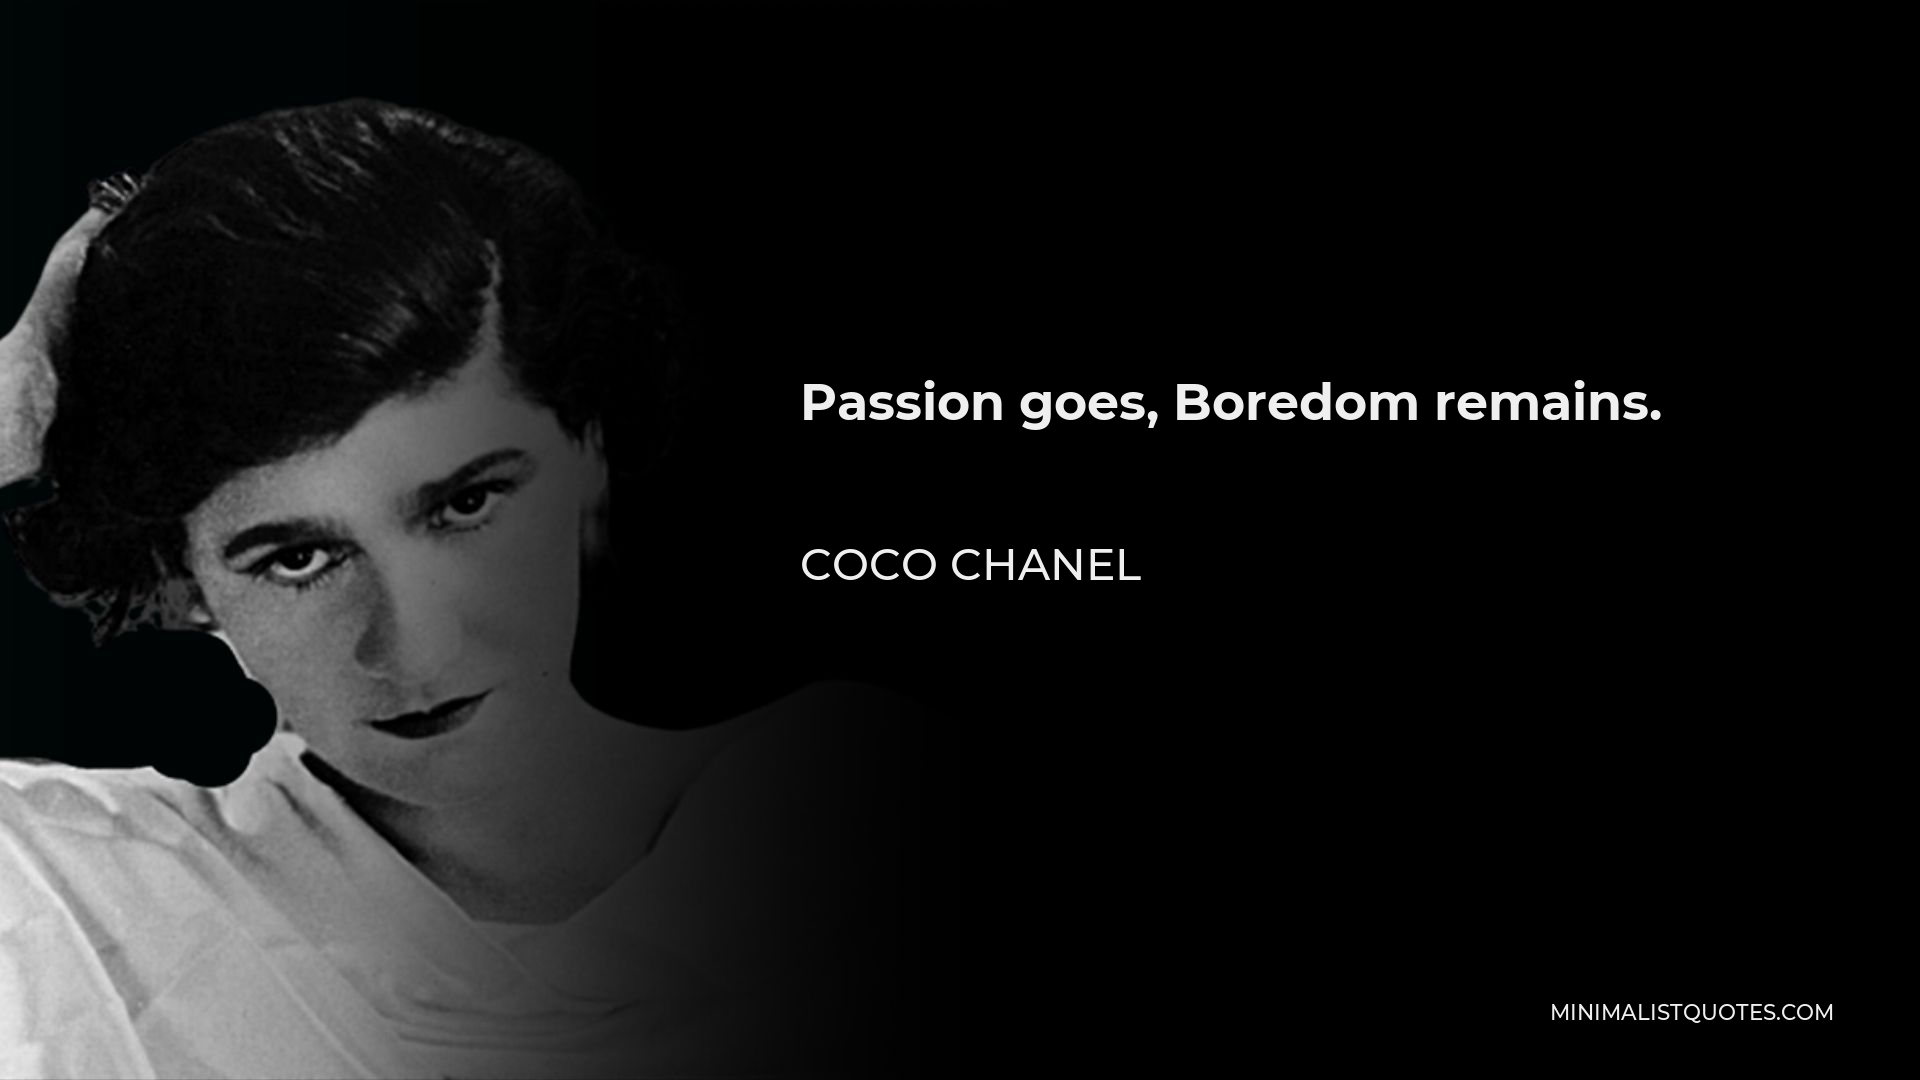 Coco Chanel Quote - Passion goes, Boredom remains.